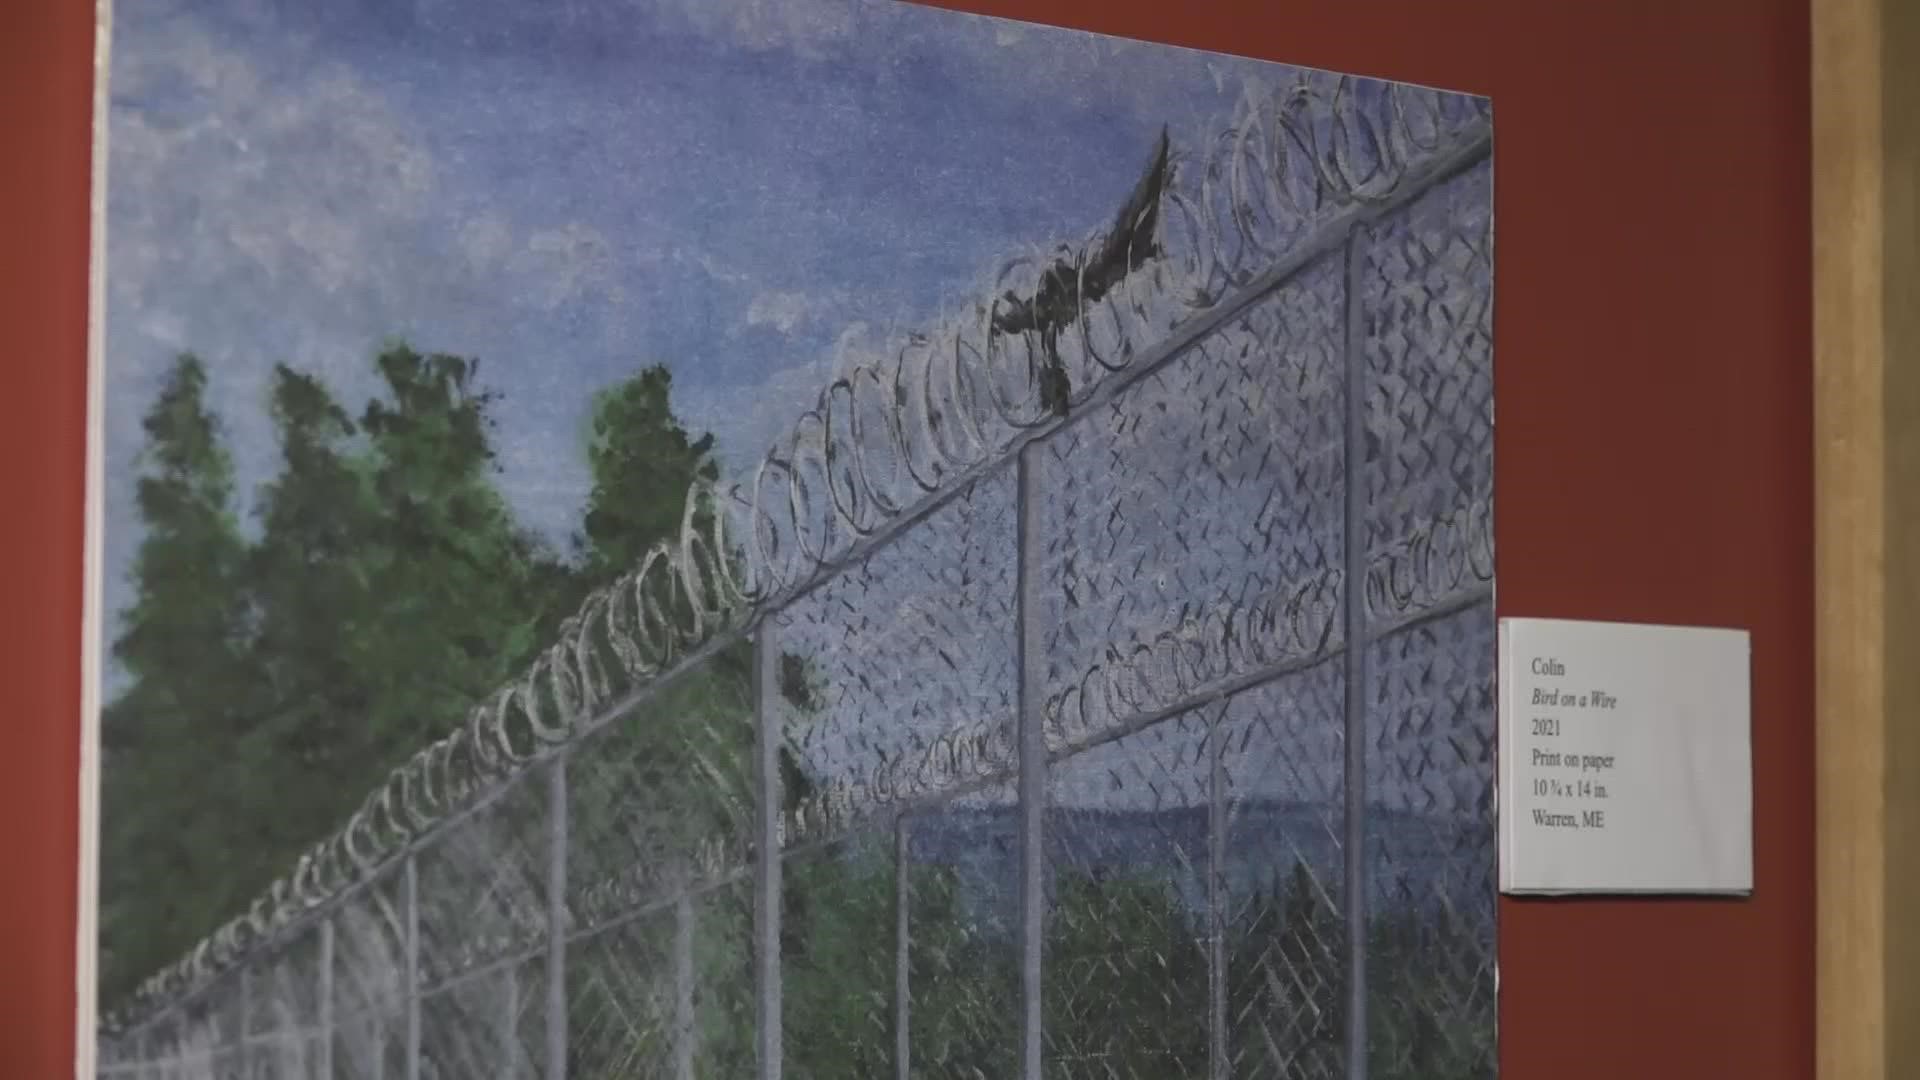 All pieces featured in the 'Freedom and Captivity: Maine Voices Beyond Prison Walls' exhibit at the Portland Media Center were created by prisoners in our state.